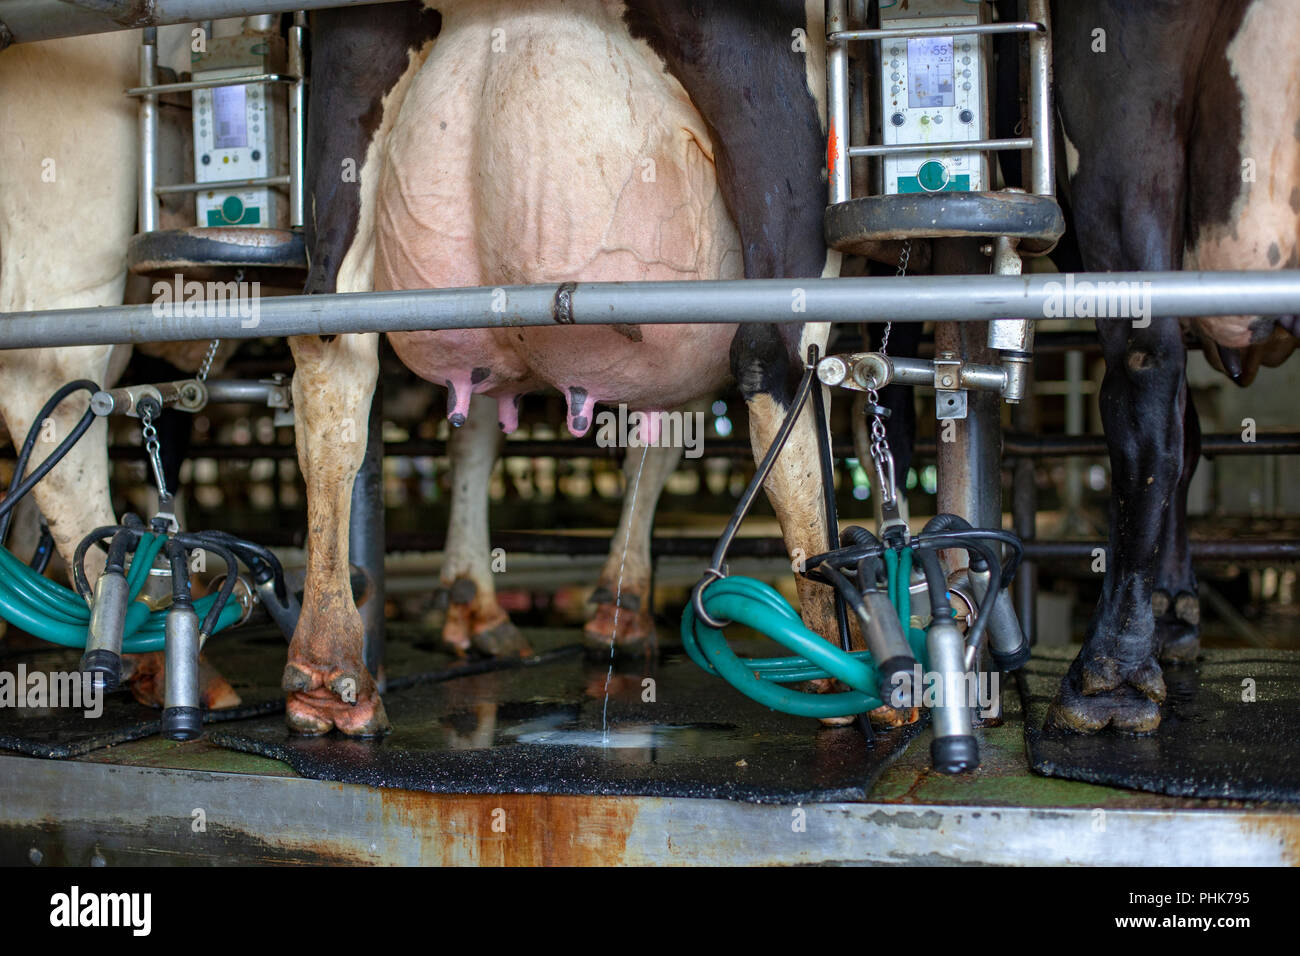 A Cow Udder Leaks Milk After Being Milked By A Robotic Milking Machine At A Large Dairy Farm In